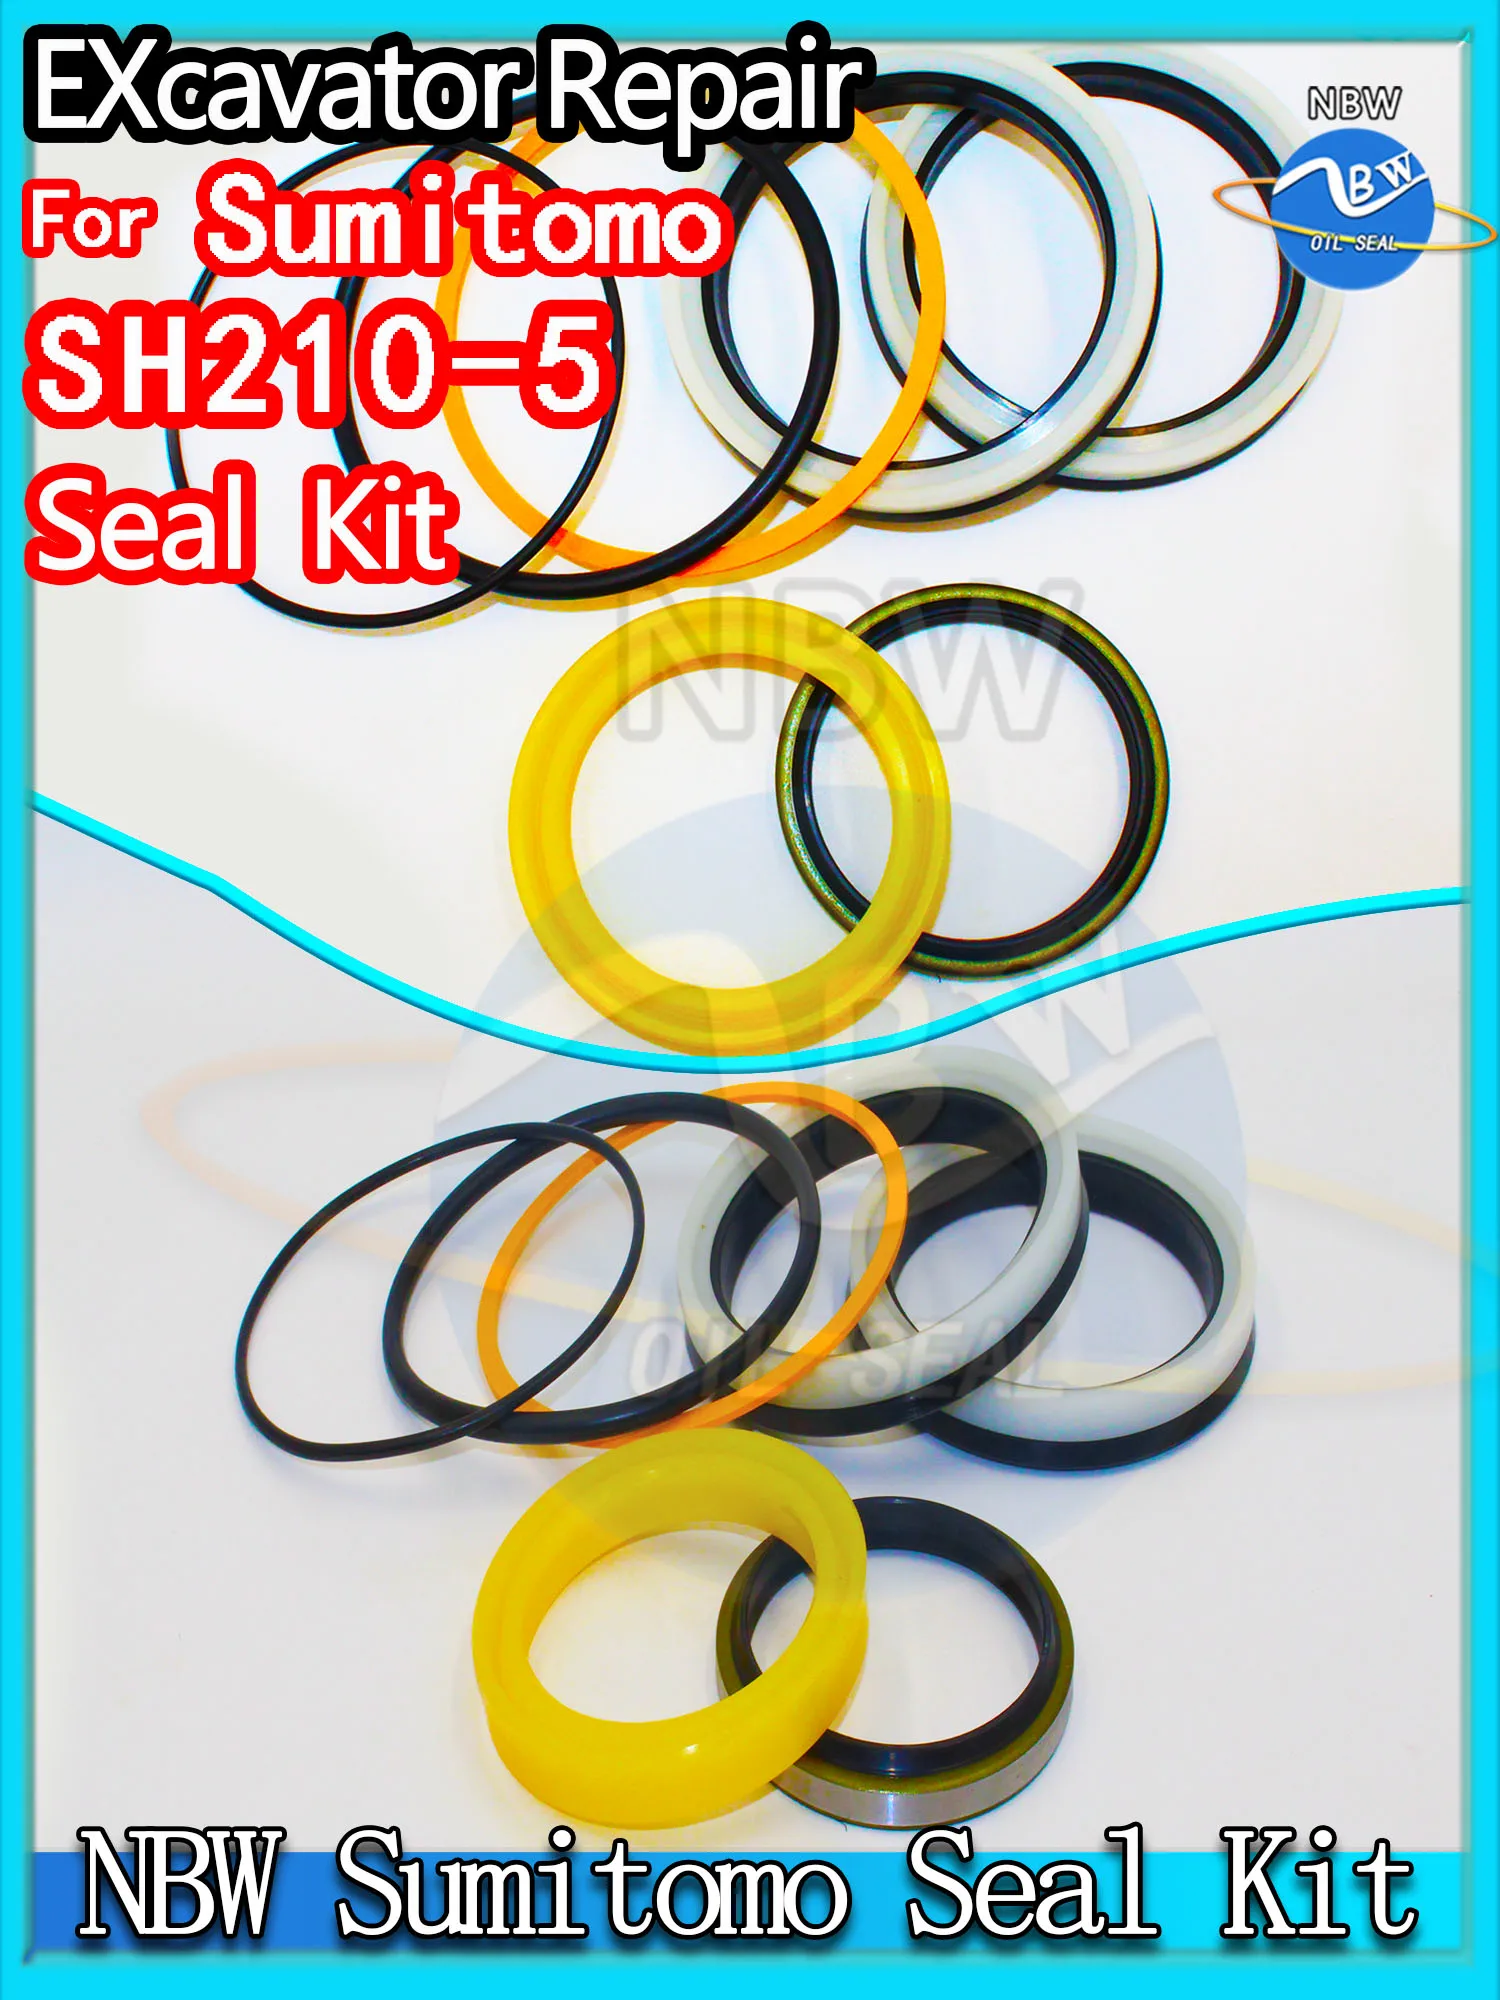 

For Sumitomo SH210-5 Excavator Oil Seal Kit High Quality Repair SH210 5 Digger Clamshell Shovel Adjust Swing Gear Center Joint